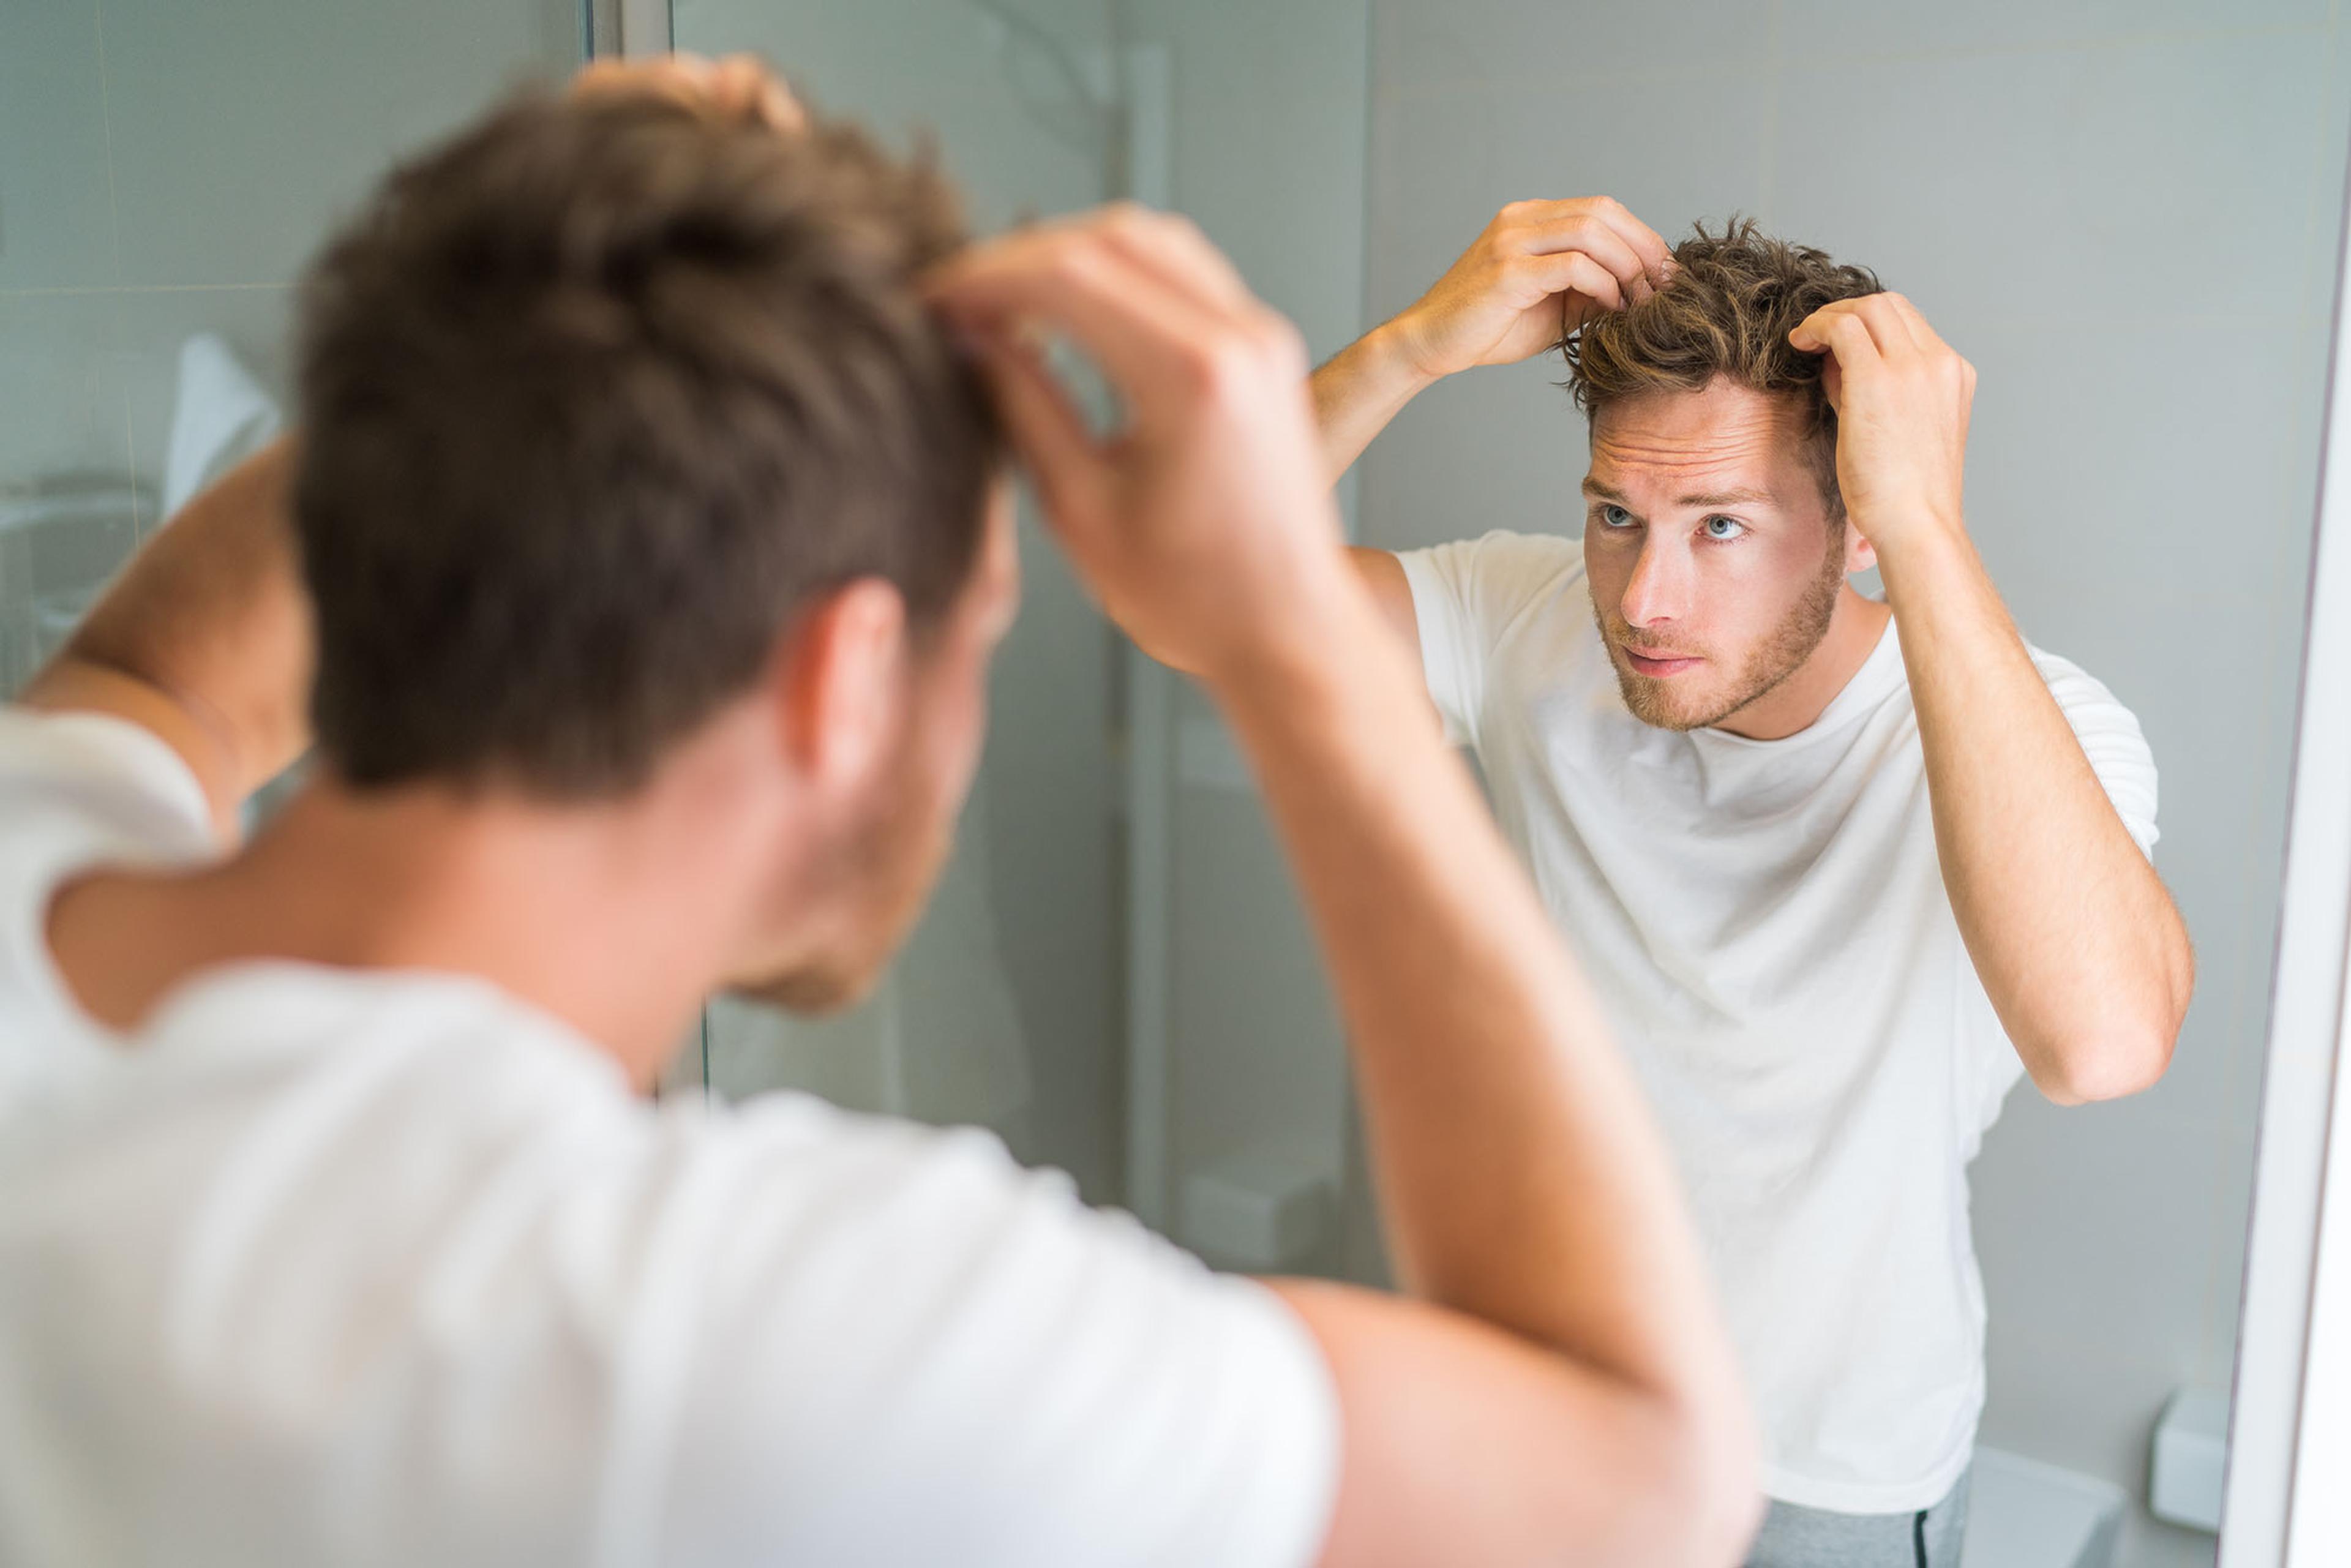 Young man looking at hair in mirror considering finasteride for hair loss.